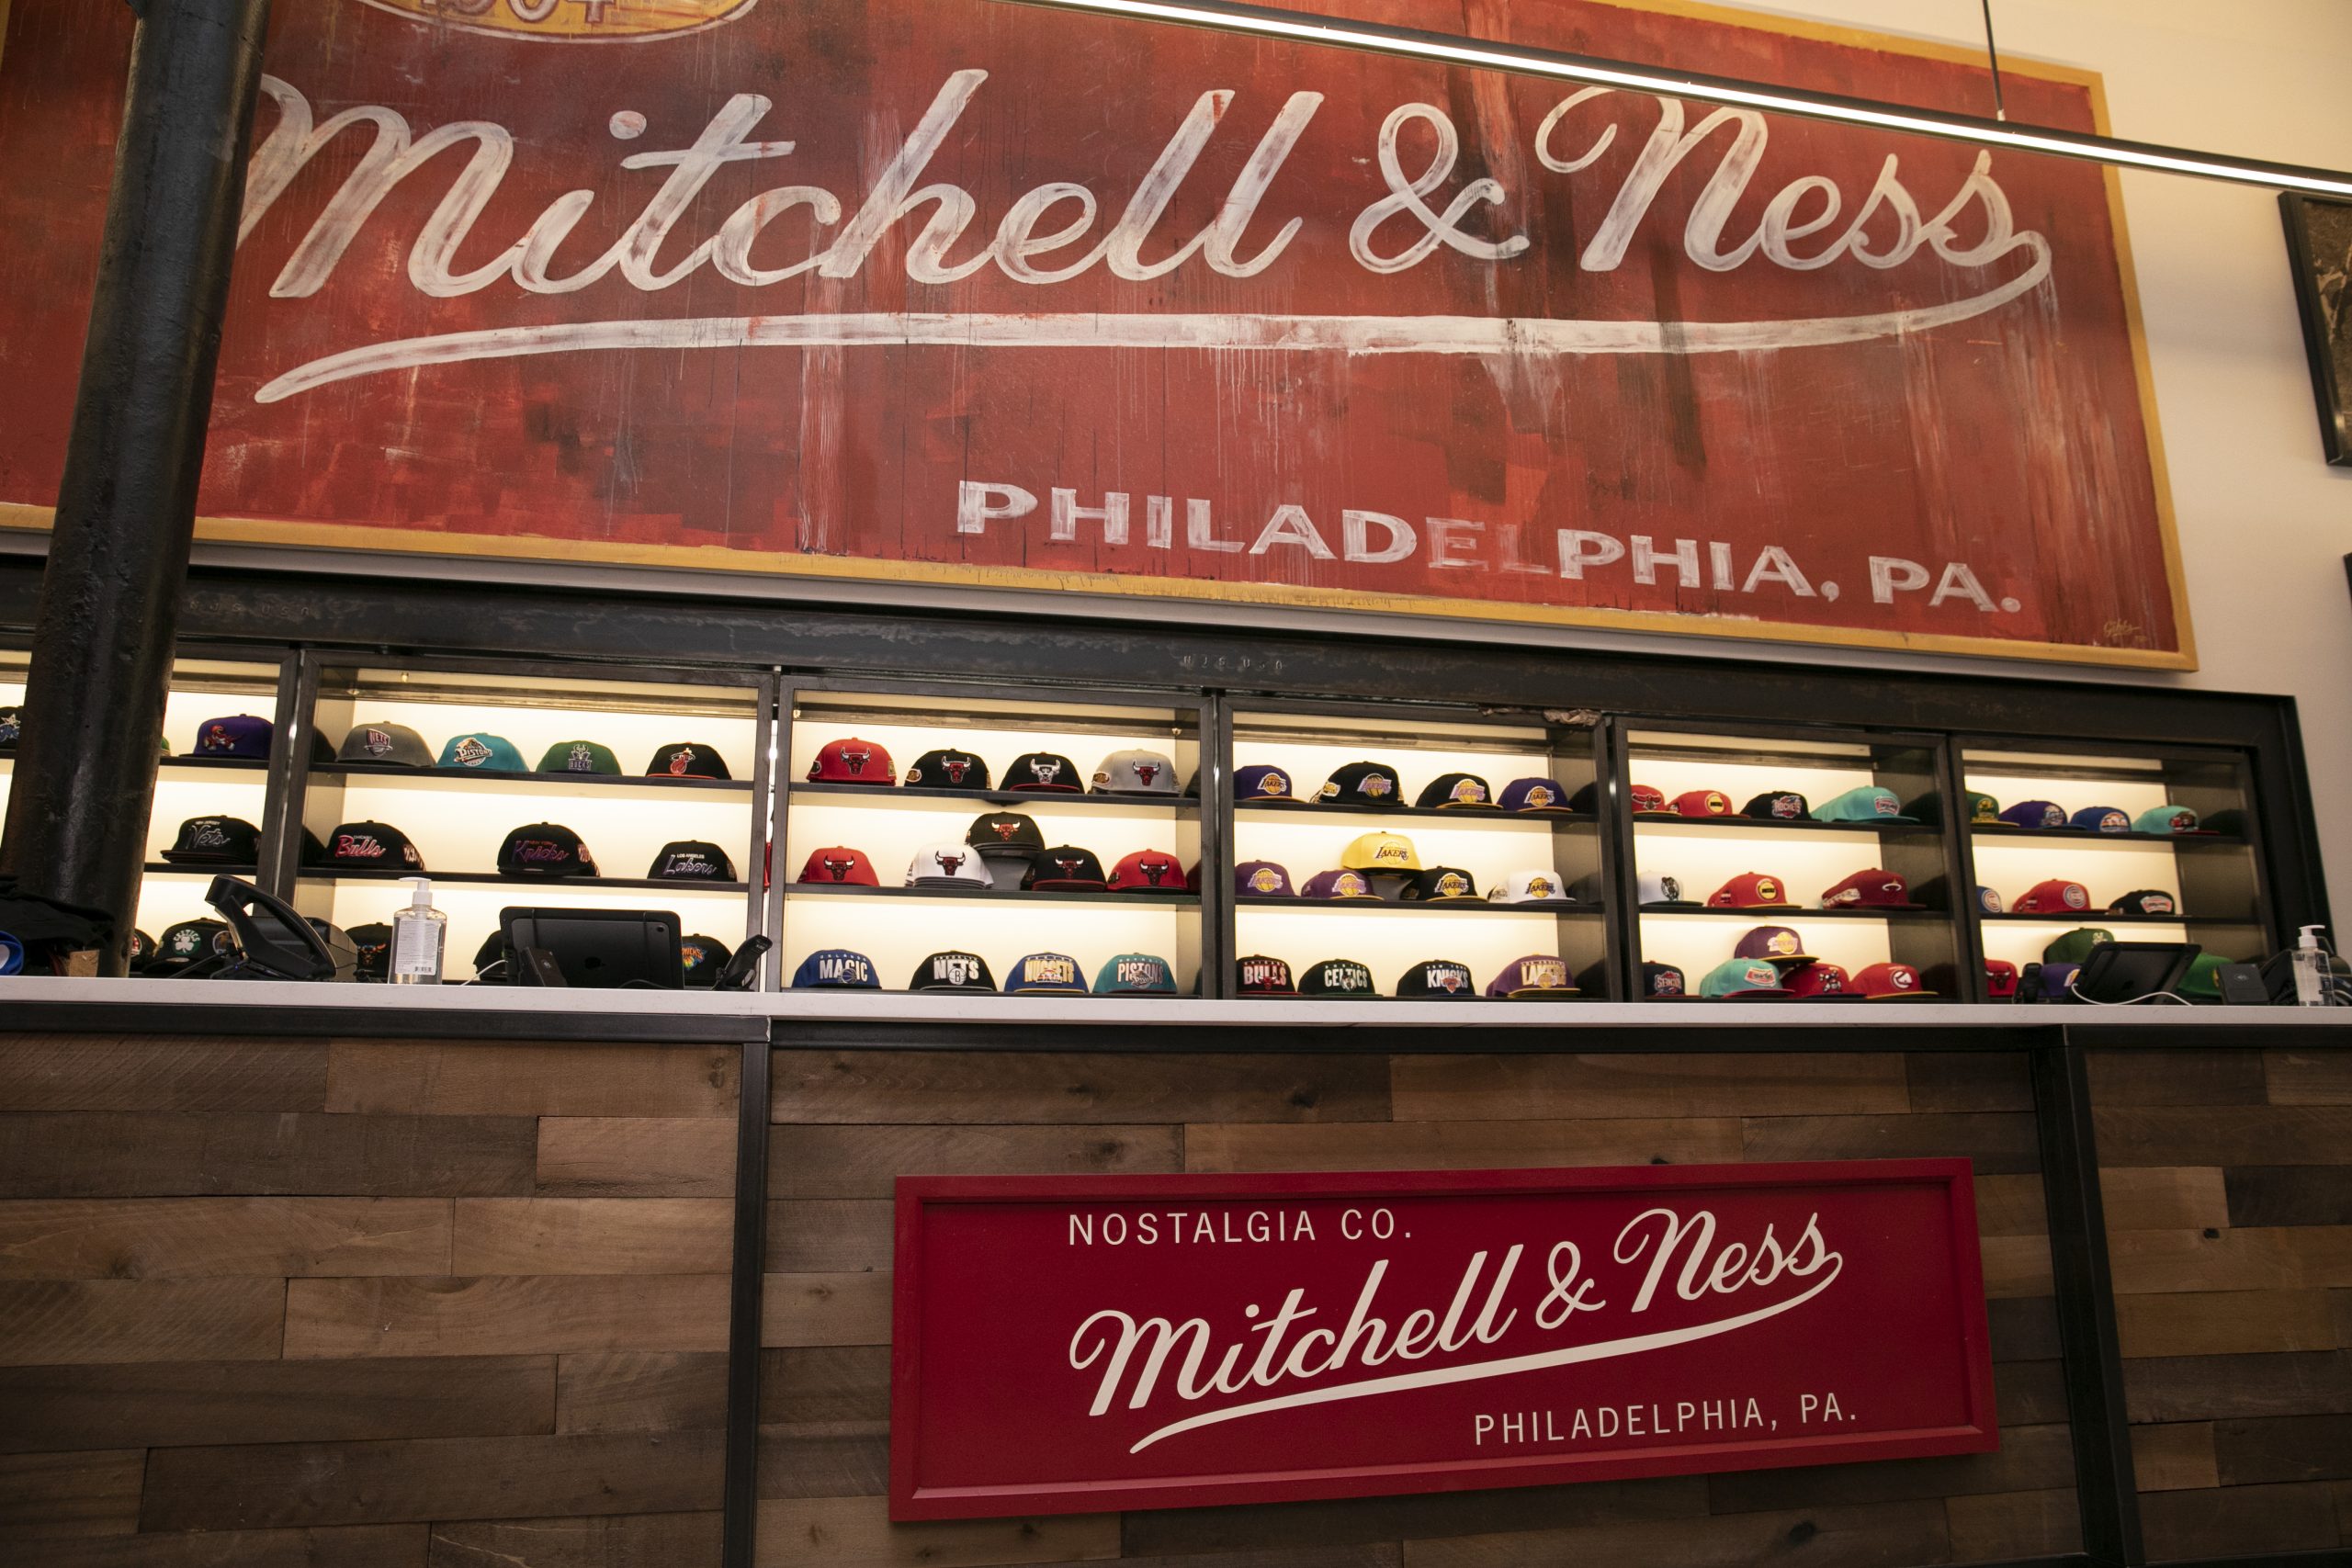 Step into the past with our newest collection of @mitchellandness